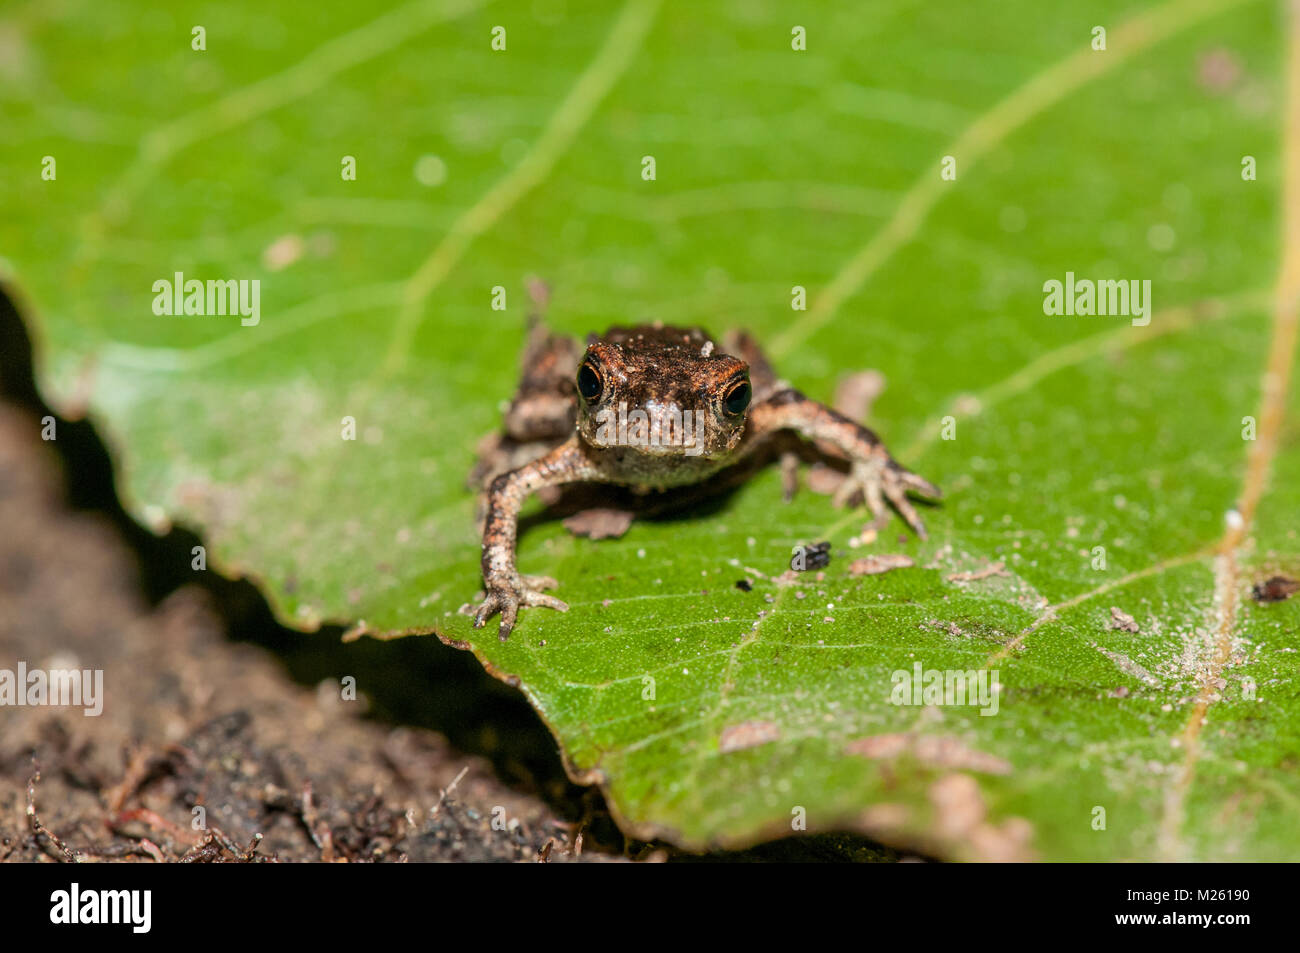 small common midwife toad (Alytes obstetricans obstetricans) on a green leaf, Banyoles, Catalonia, Spain Stock Photo